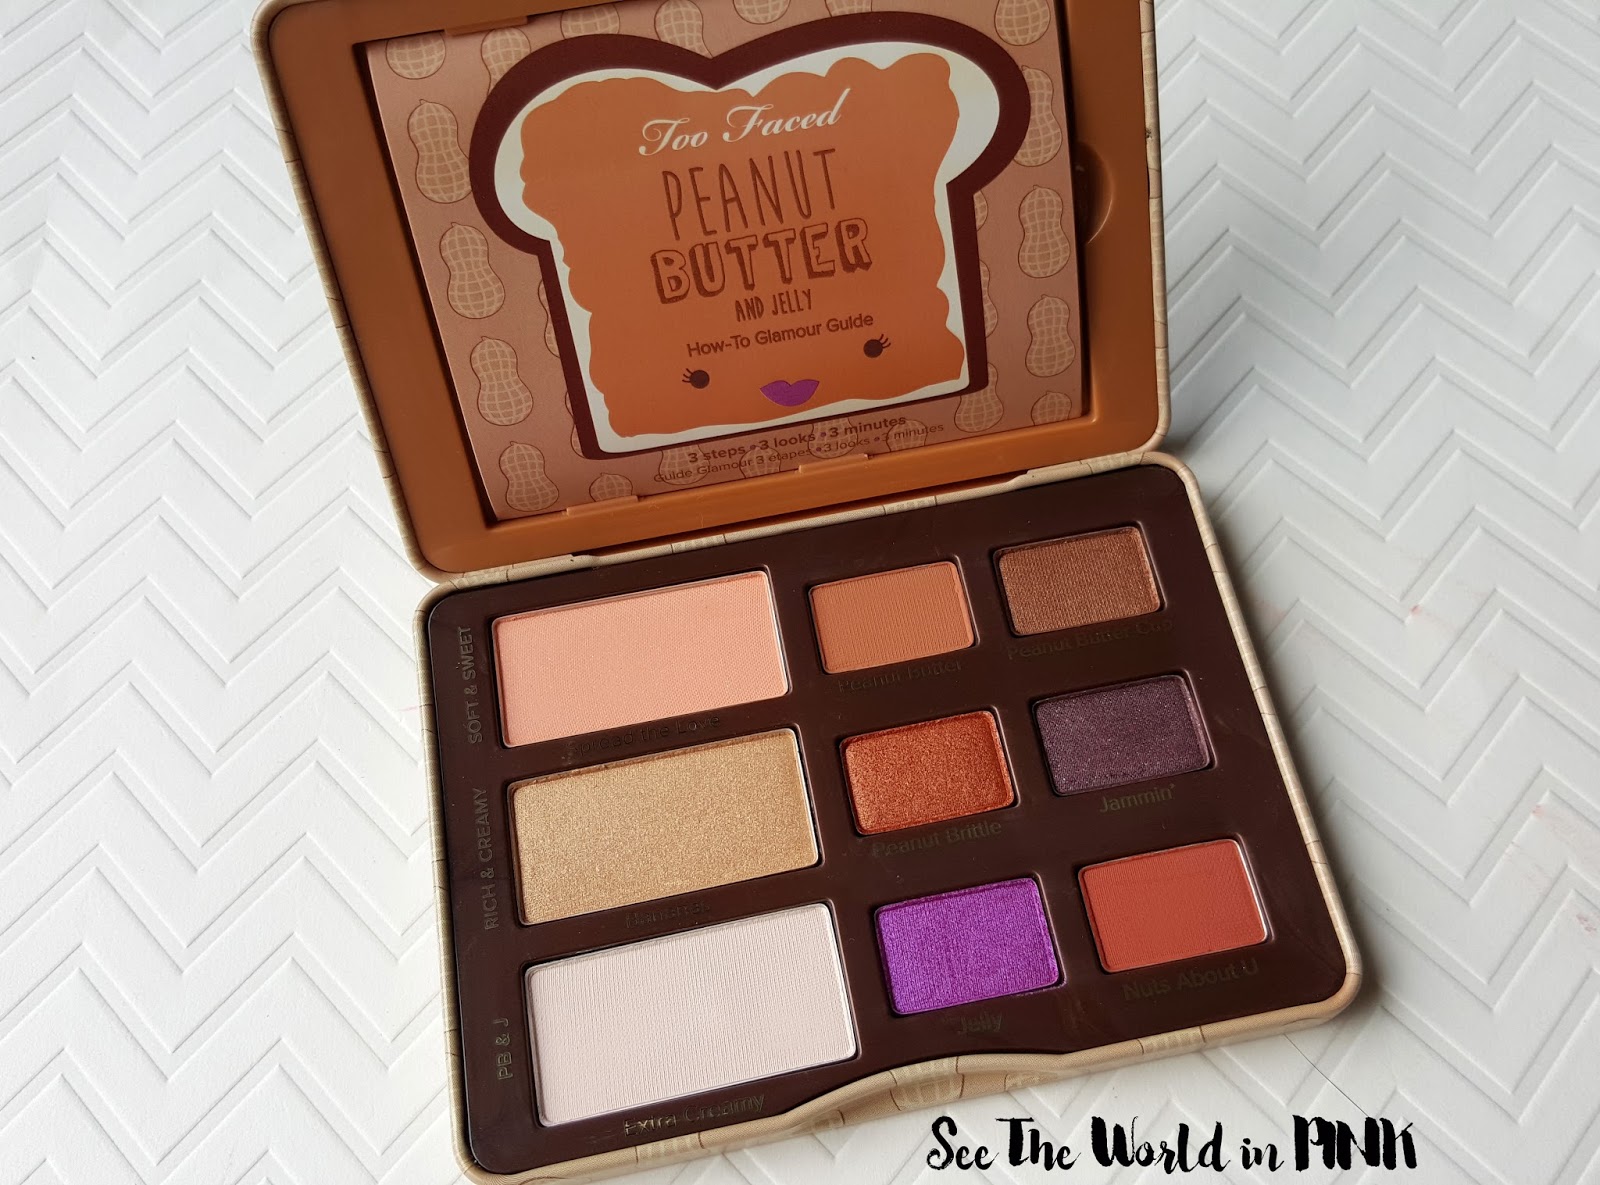 Too Faced Peanut Butter and Jelly Palette - Review, Swatches and a Makeup Look! 